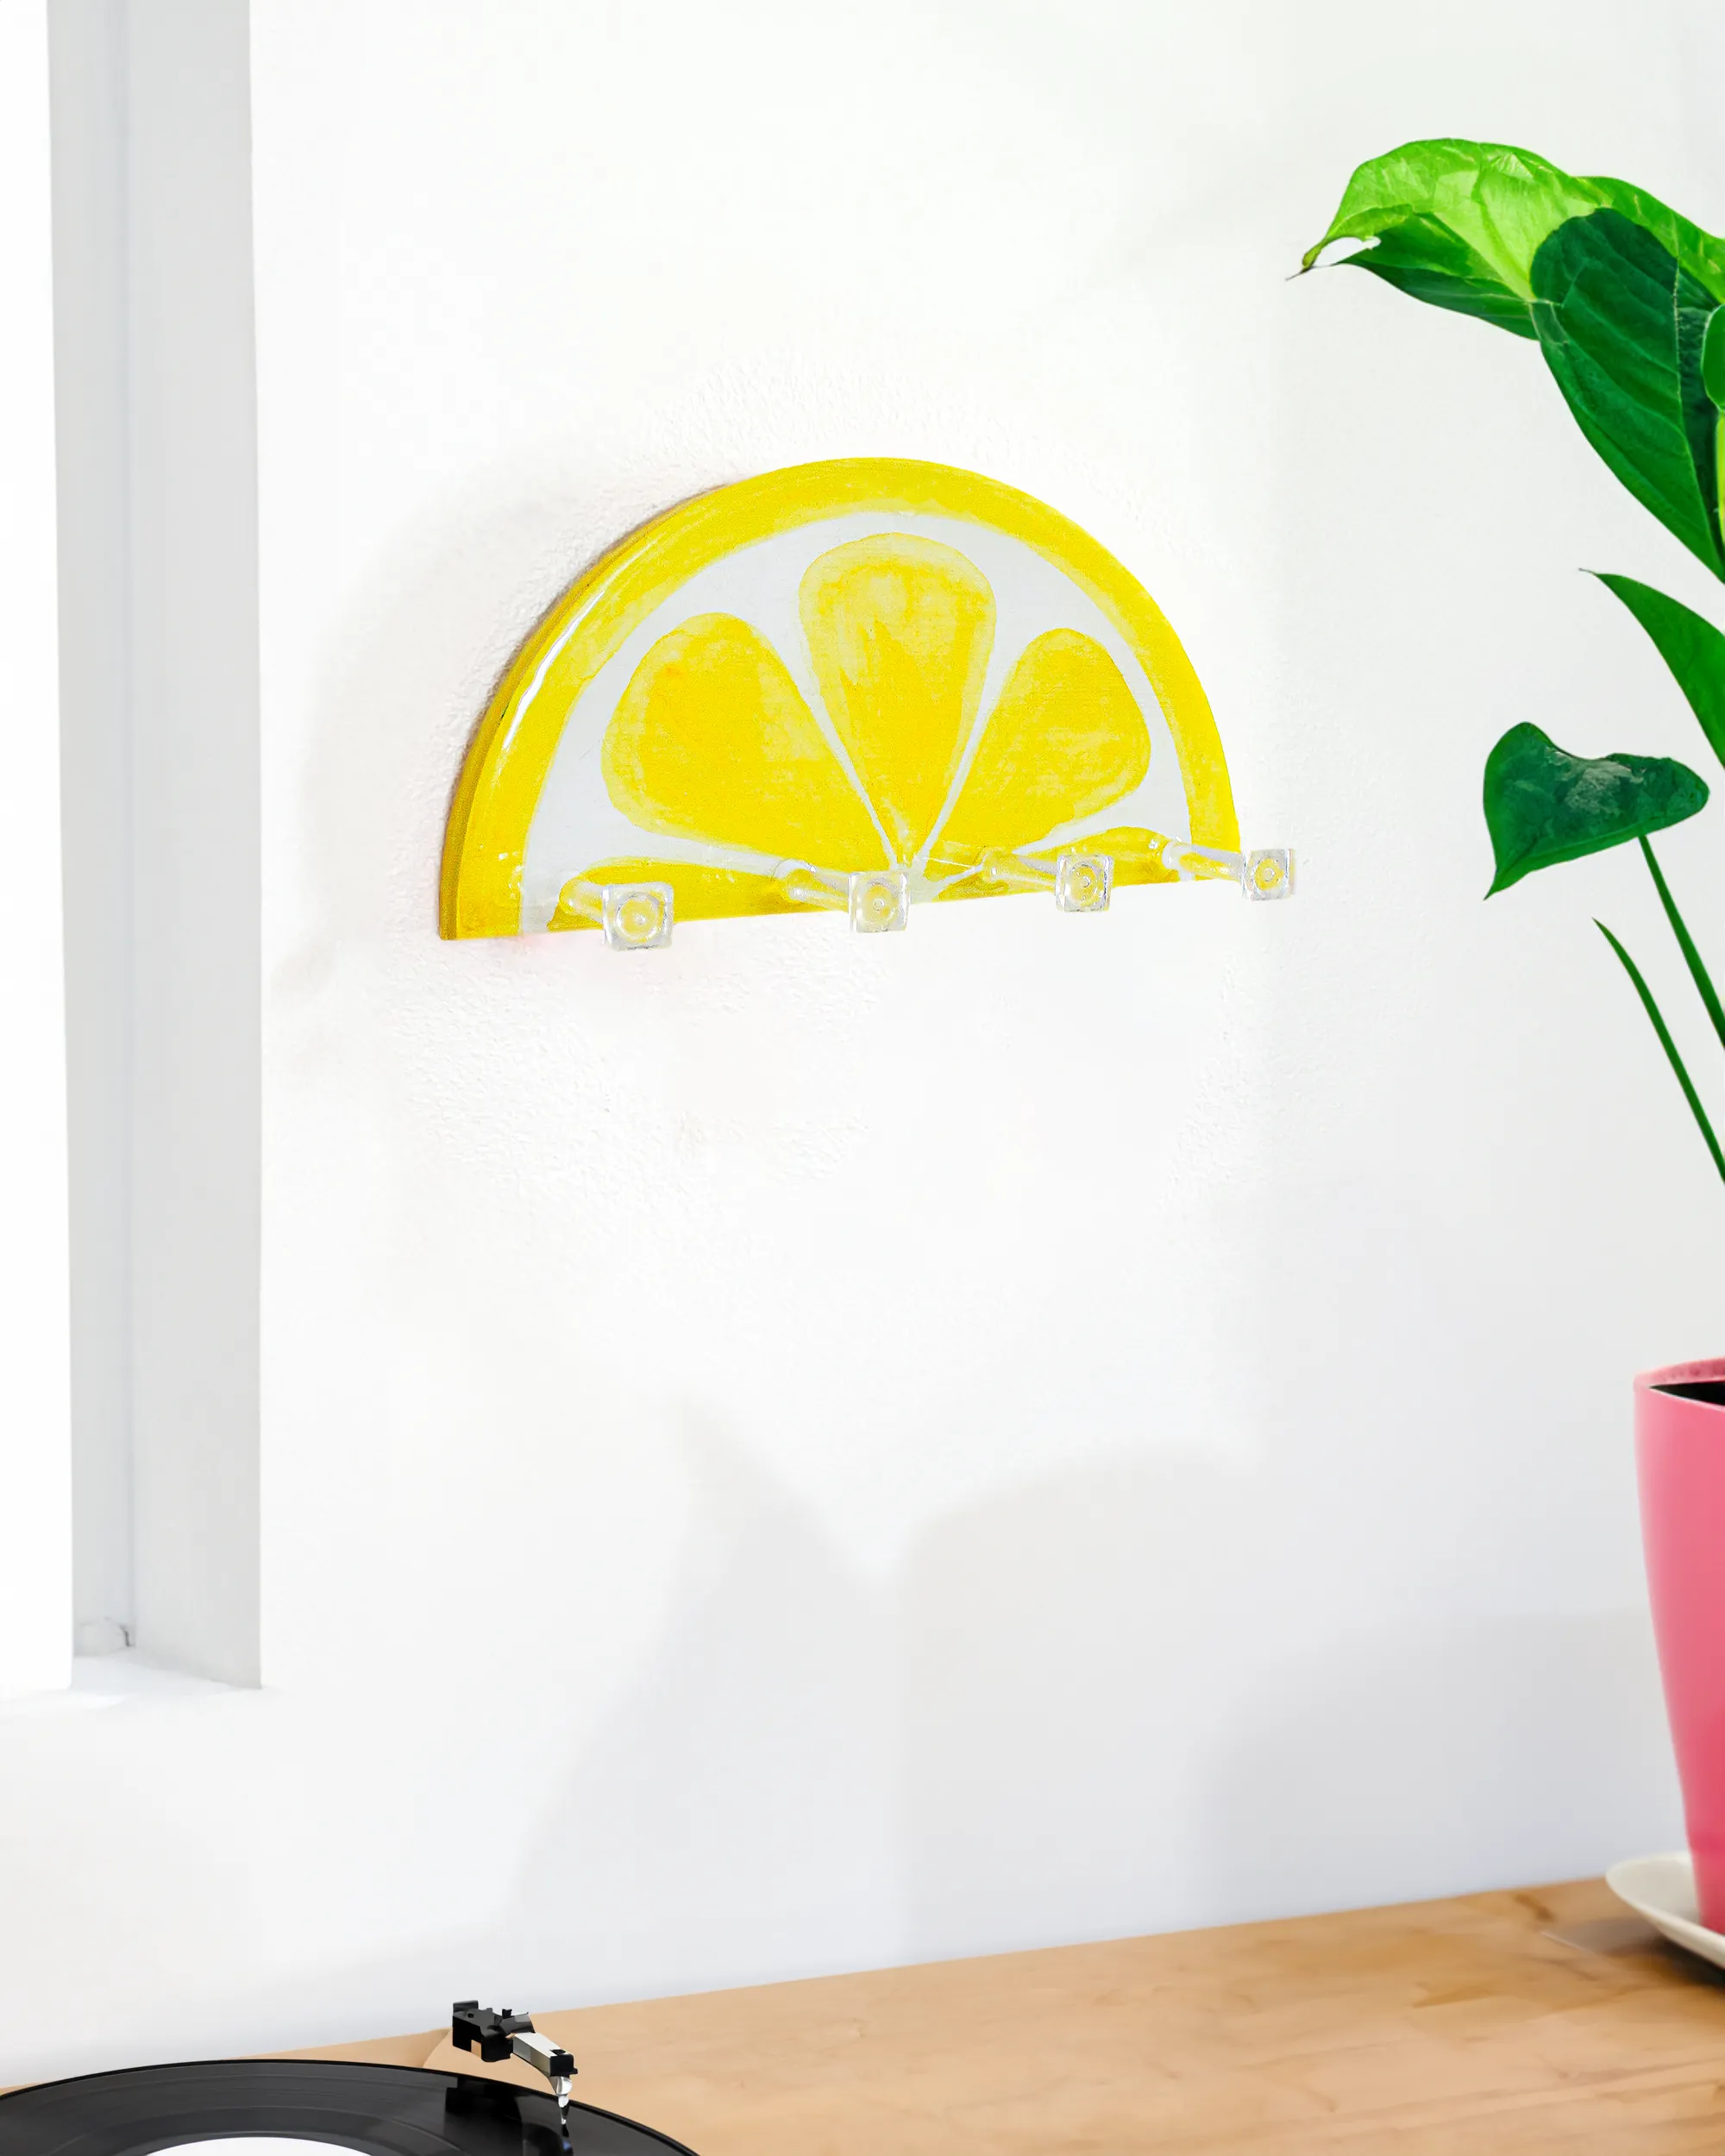 Lemon-themed key holder made of wood and resin, featuring four durable hooks for keys and small accessories.